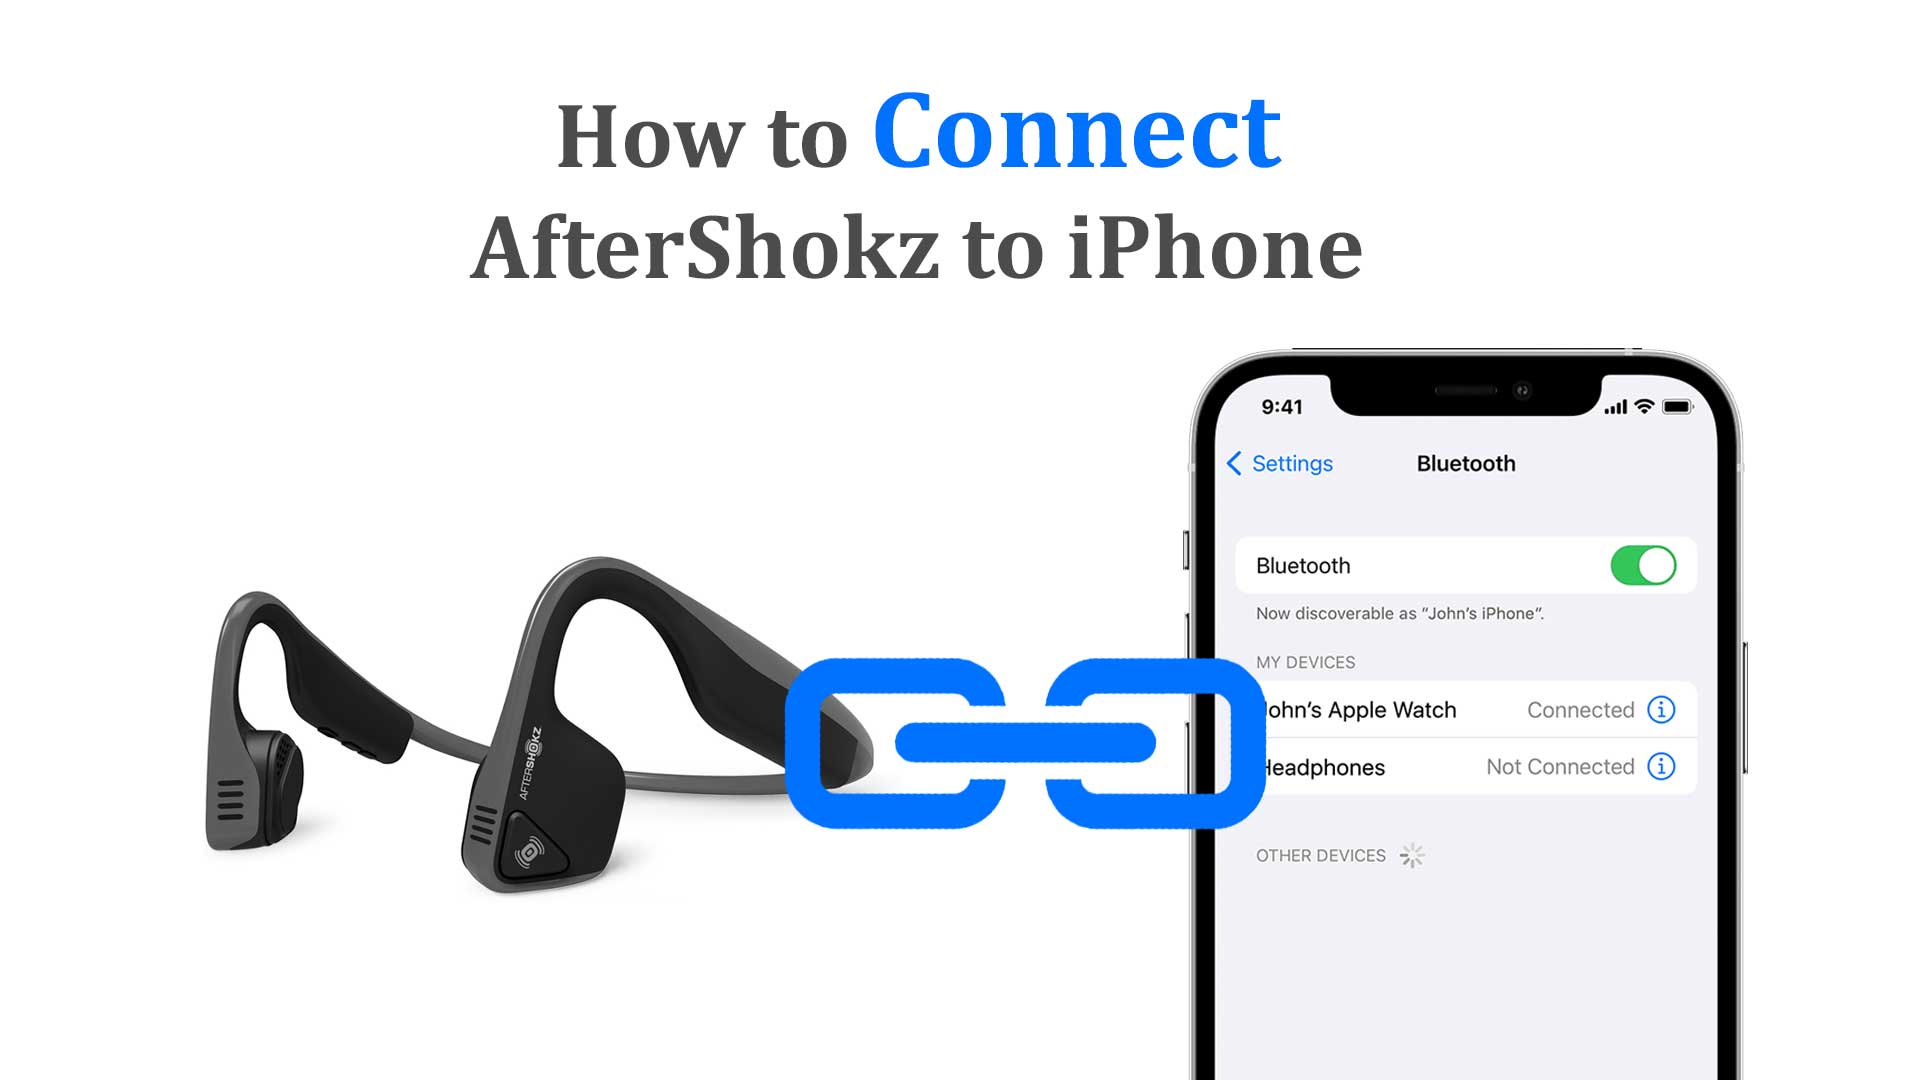 How to connect aftershokz to iPhone